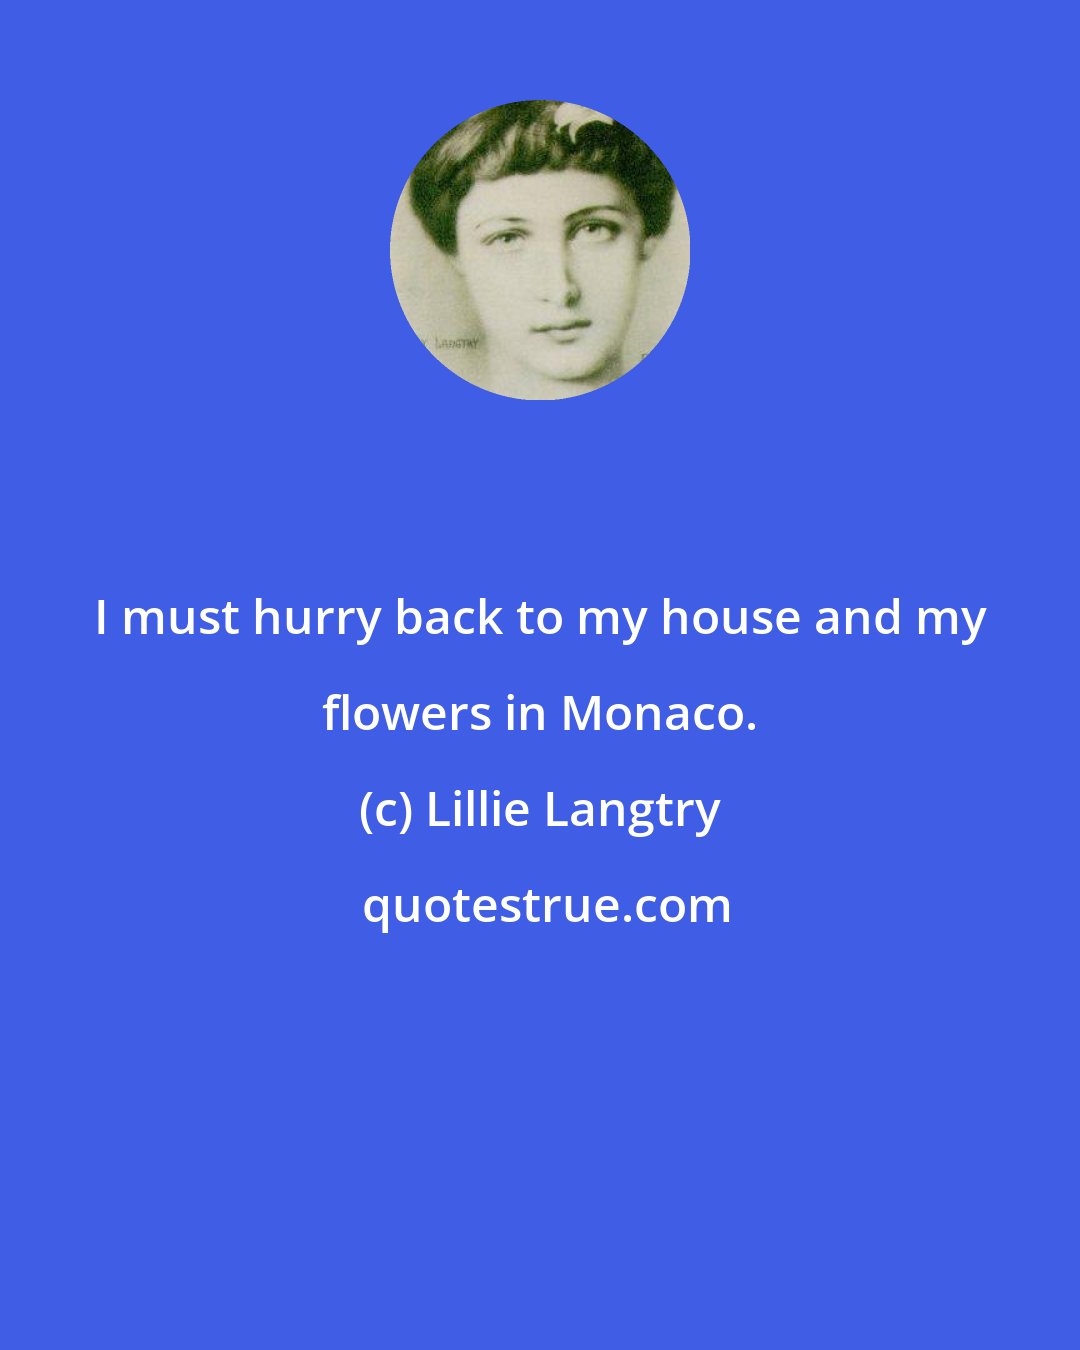 Lillie Langtry: I must hurry back to my house and my flowers in Monaco.